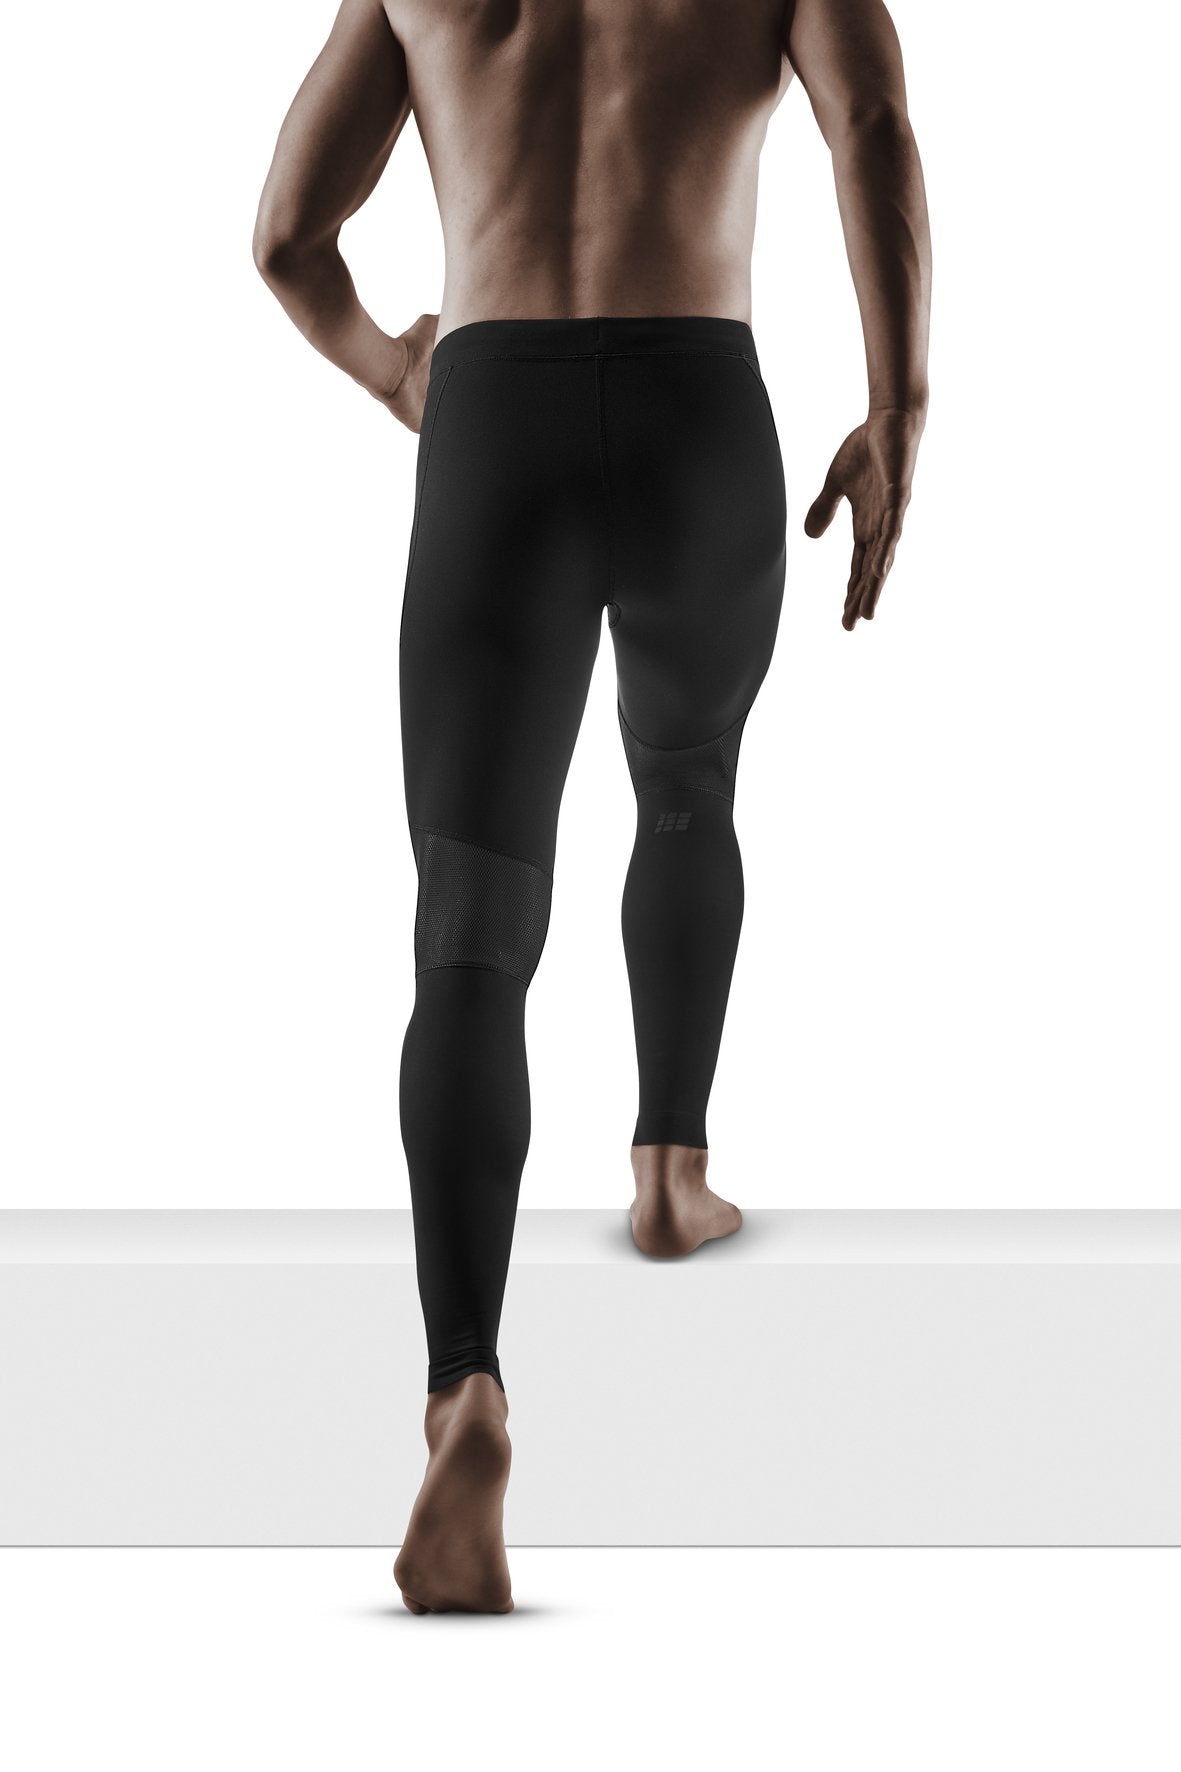 Wholesale Factory Compression Sports Leggings Men's Running